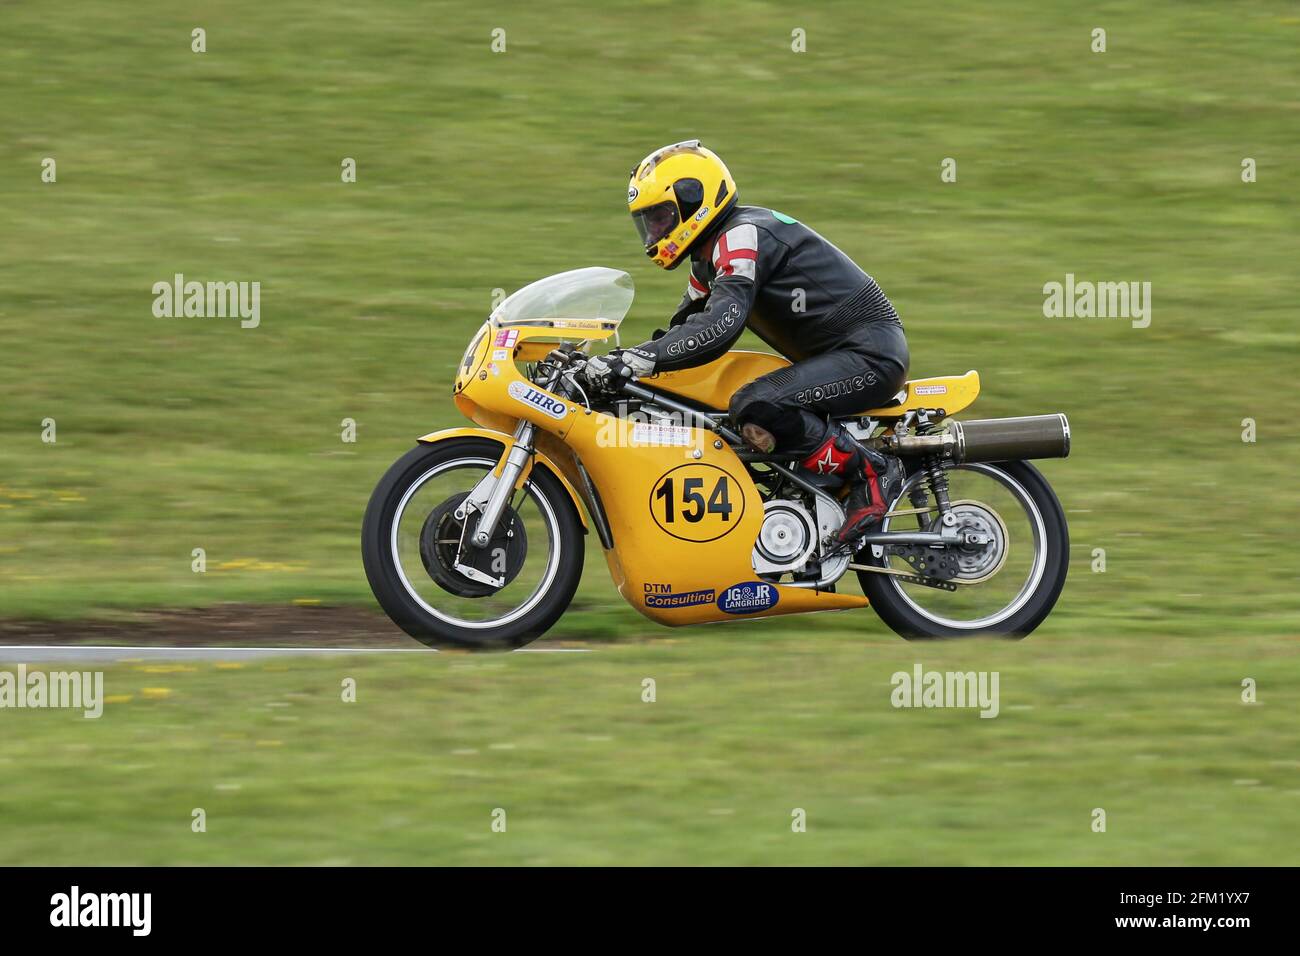 Ian Steltner on the Seeley G50 500 approaces The Gooseneck at the Cadwell Park International Classic in July 2015 Stock Photo